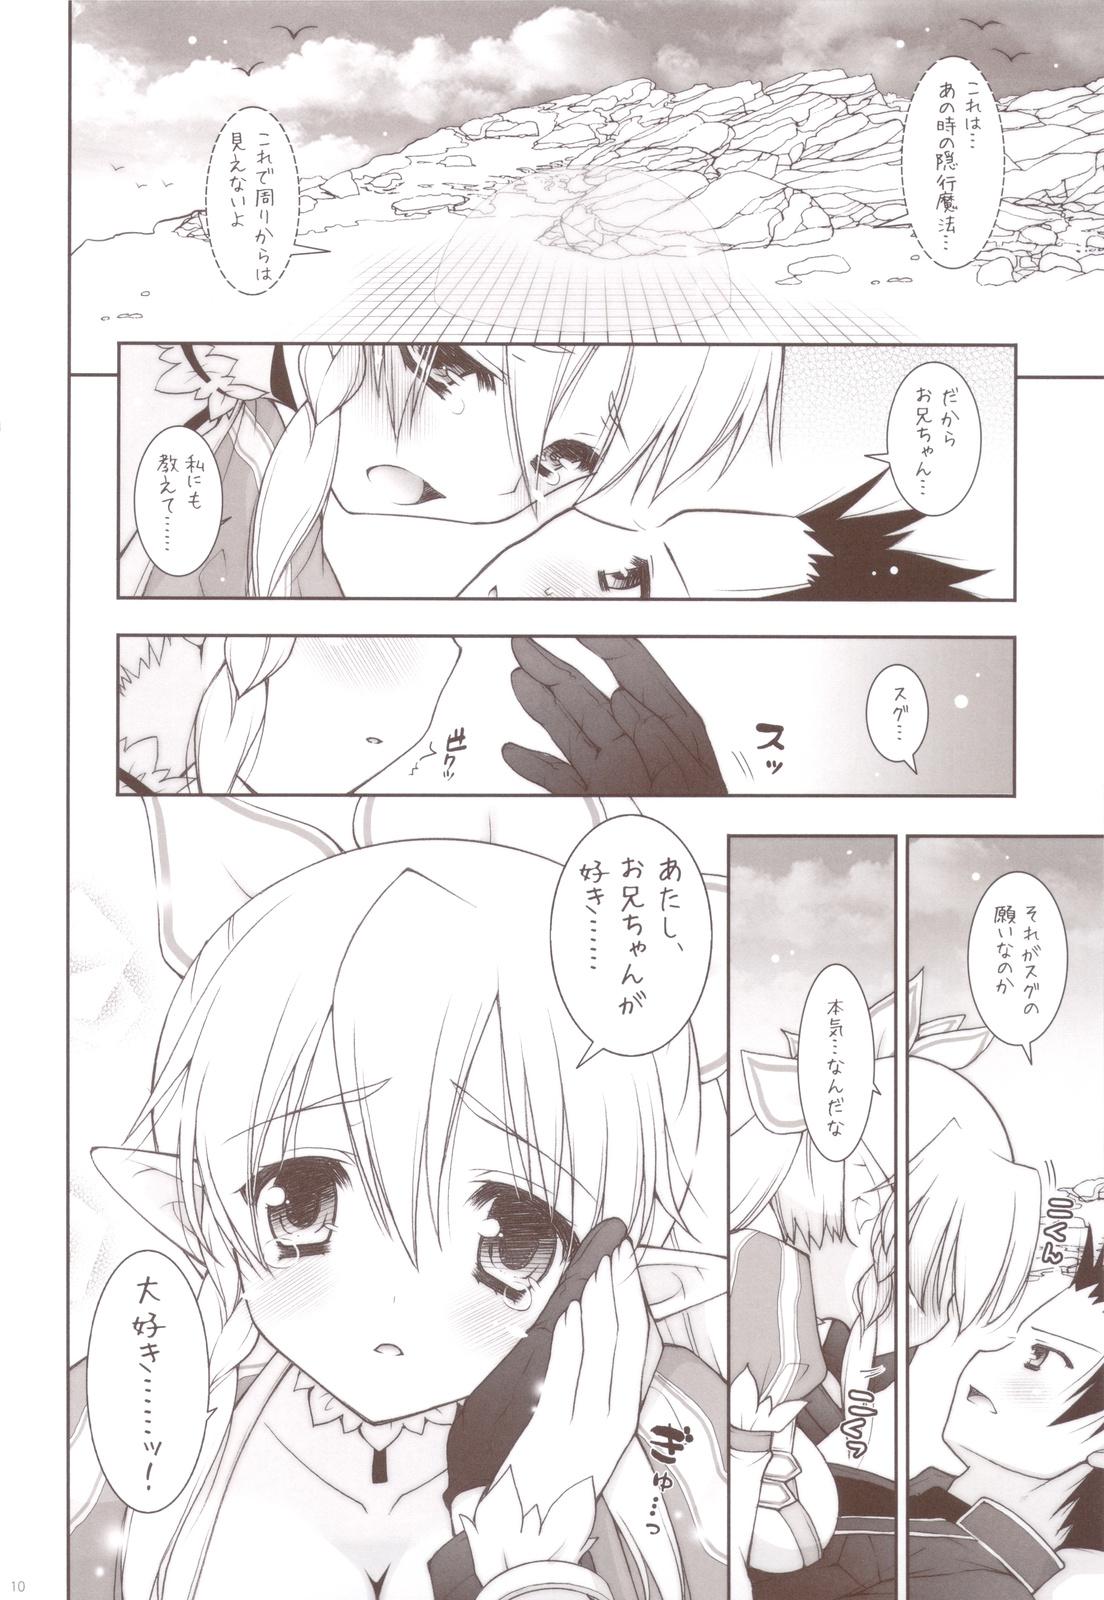 Sissy Sex And Oppai + Omake Bon - Sword art online Sucking Dick - Page 9